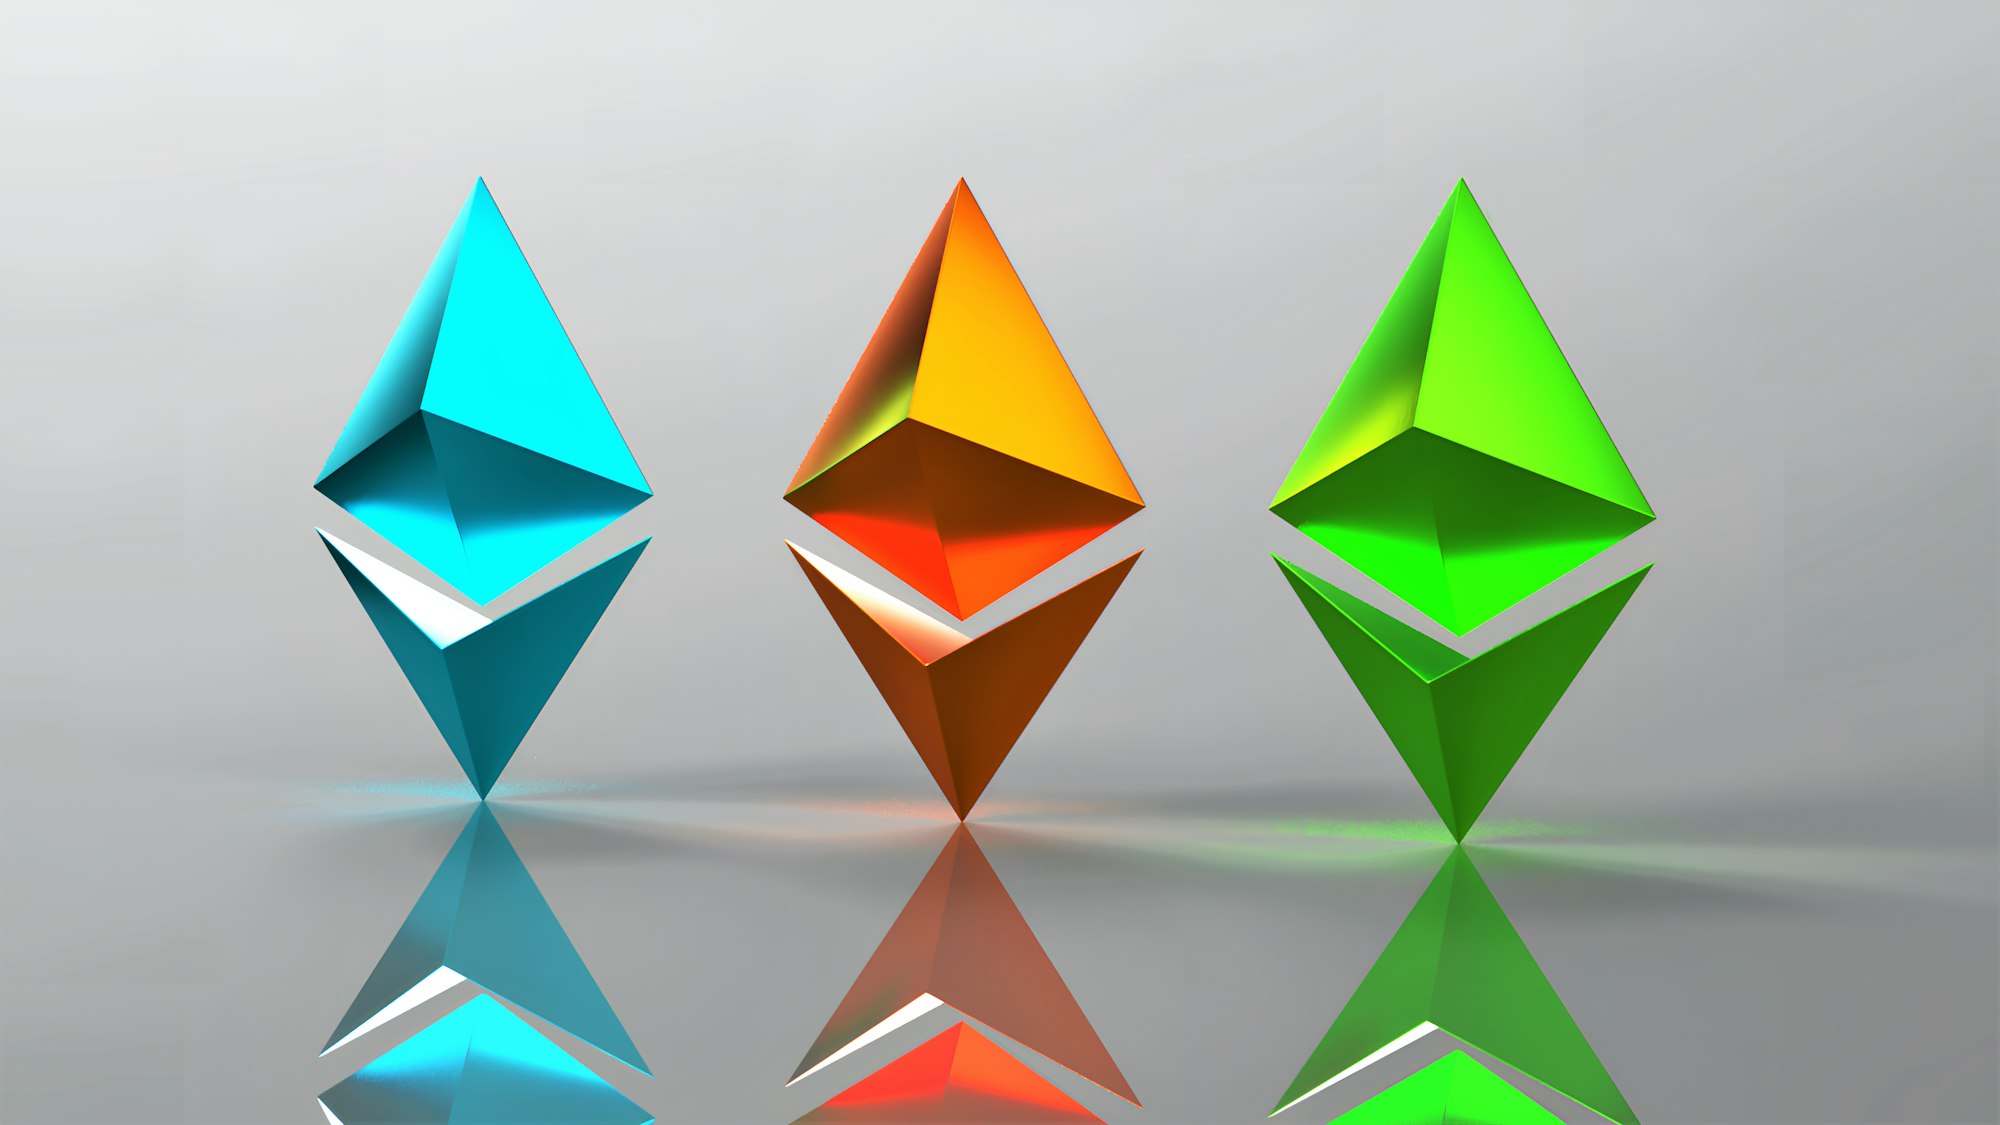 This is a 3D render of some Ethereum jewels. They are beautiful and valuable! It's an impressive sight, and it's sure to please anyone who loves Ethereum or crypto or just enjoys pretty things.